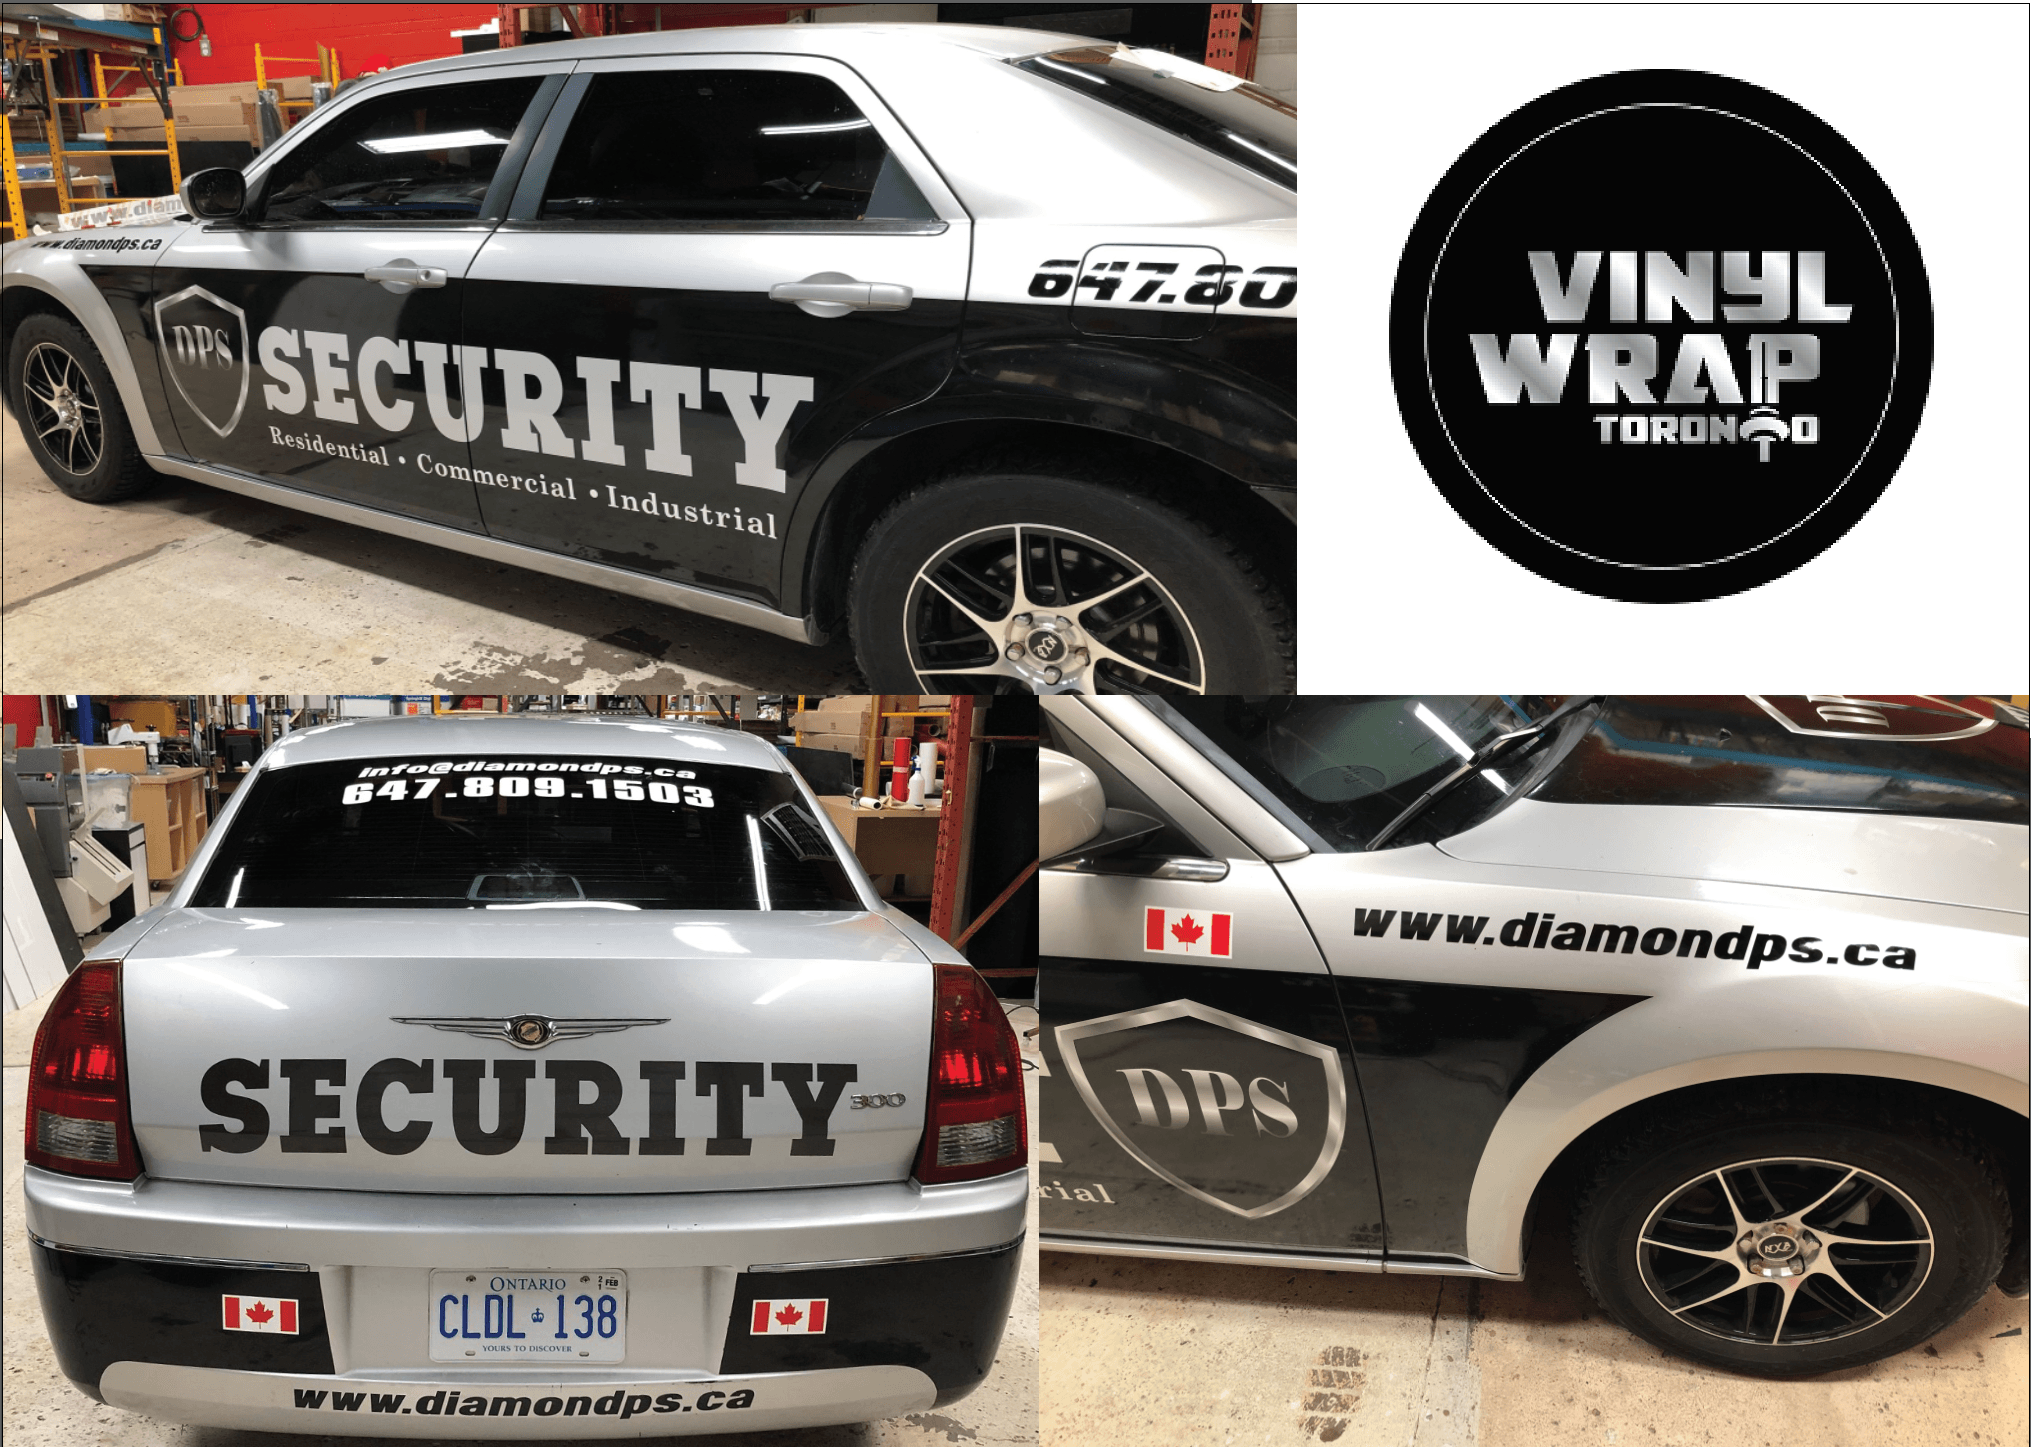 Shop for High Quality Custom Vinyl Decals & Save Up to 30